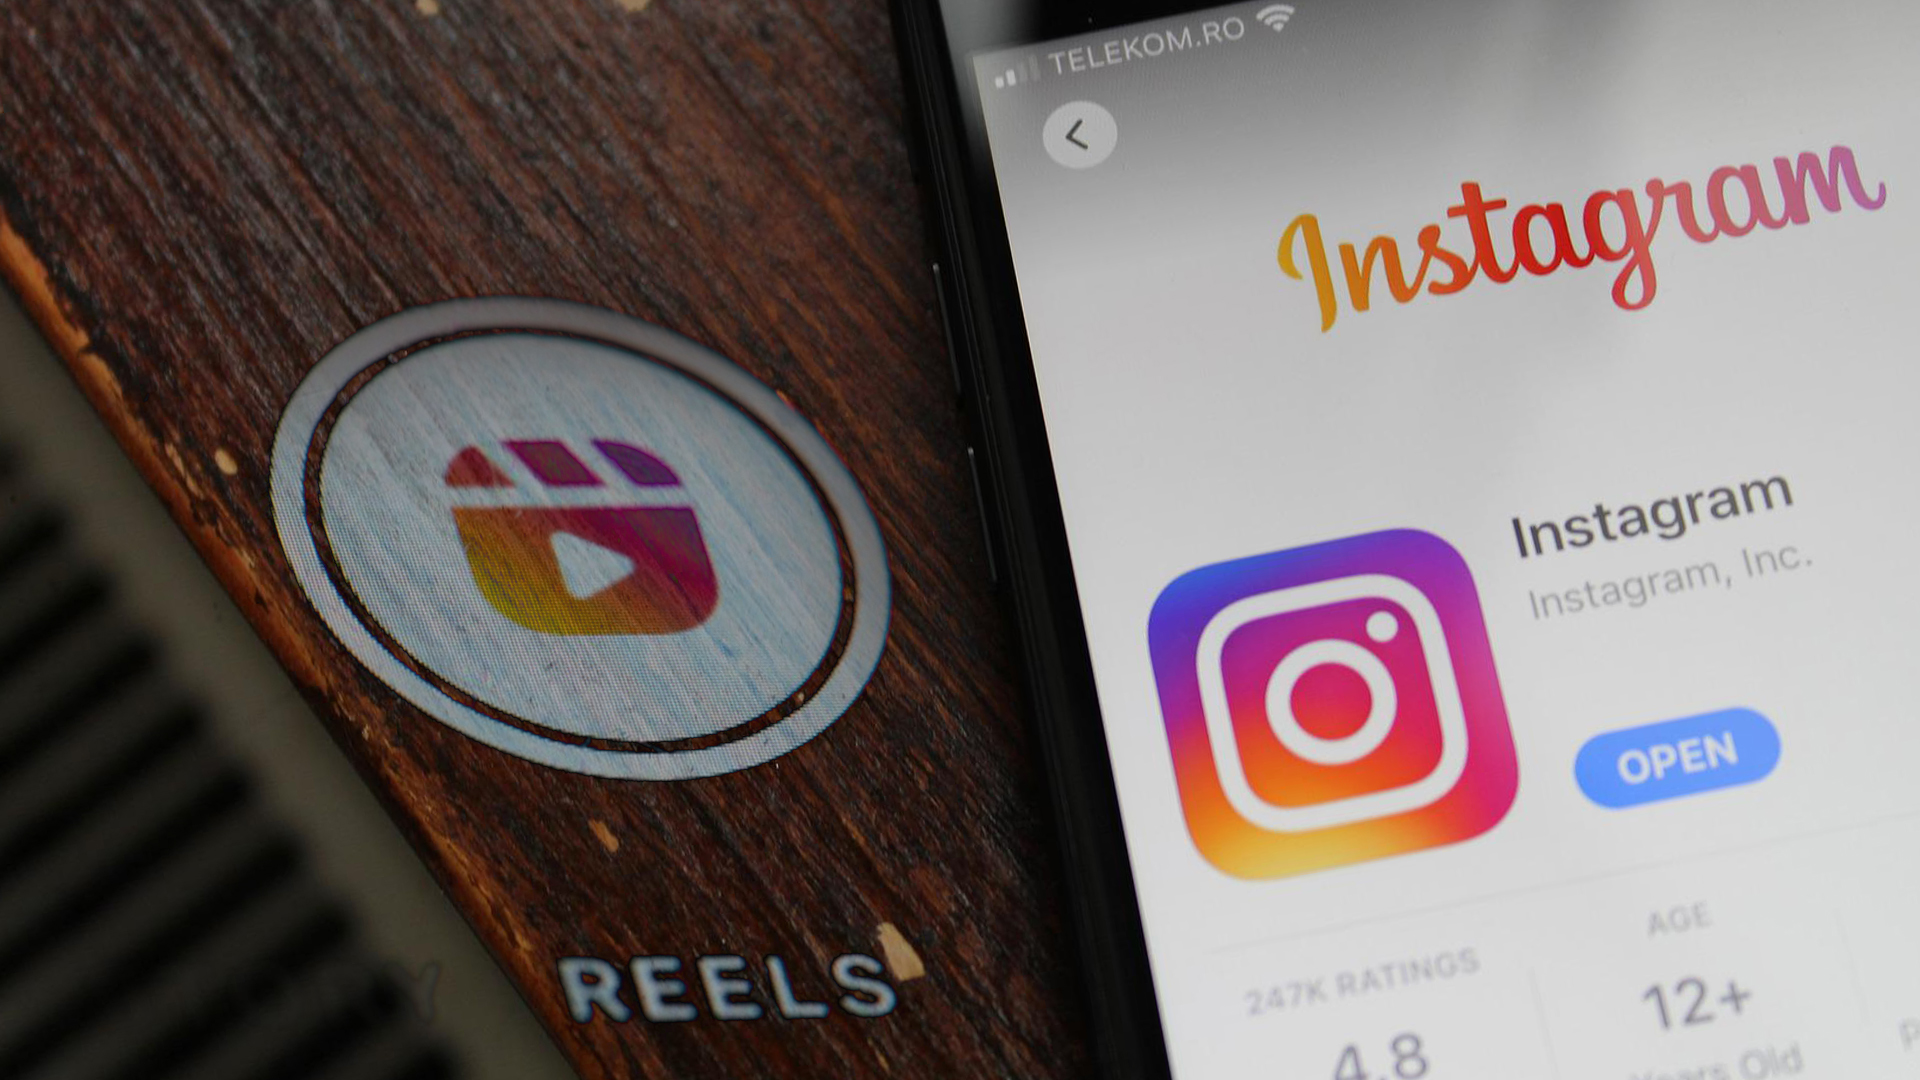 What do the new Instagram features mean for APAC marketers?